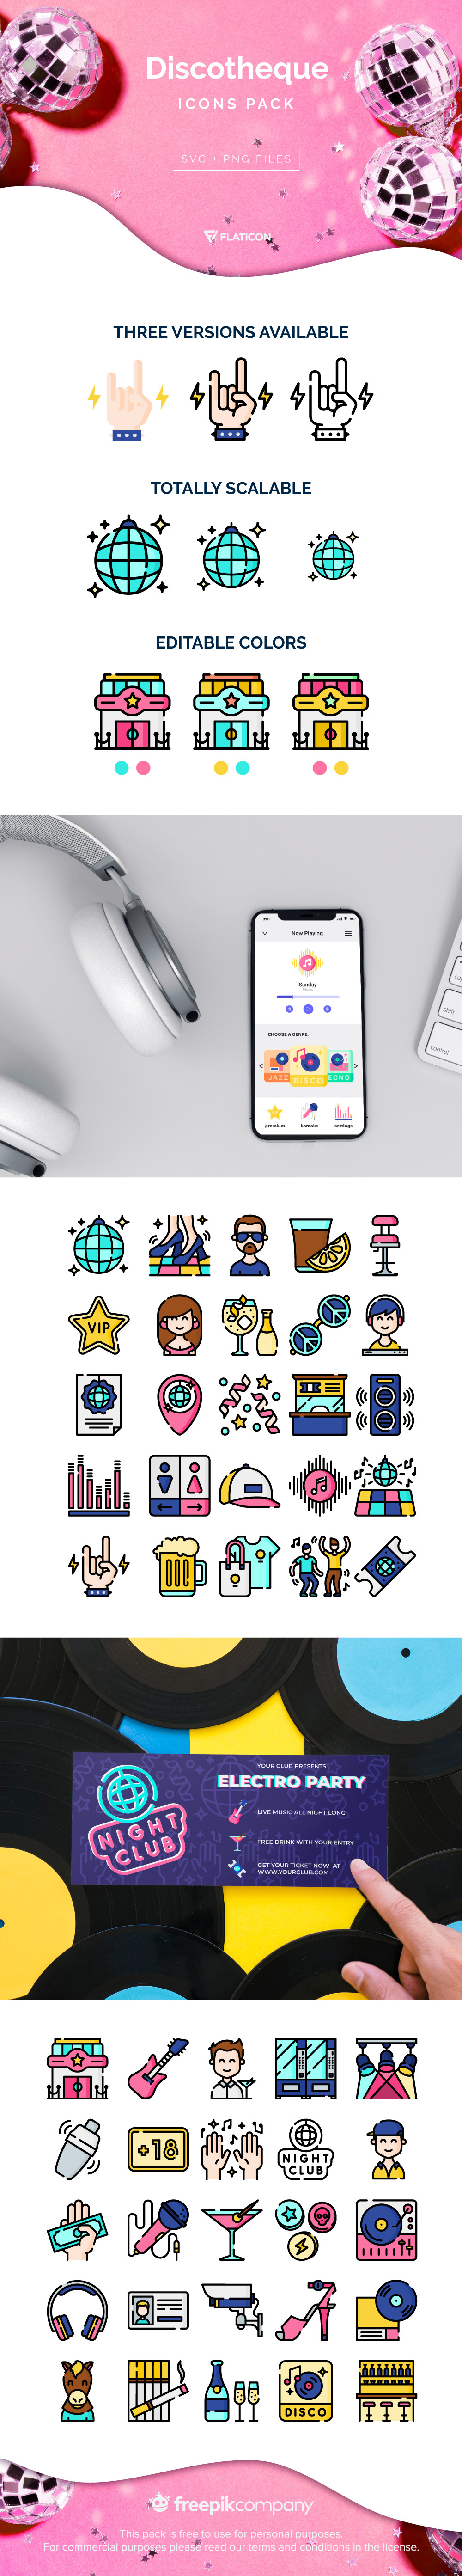 Discotheque Icons Pack